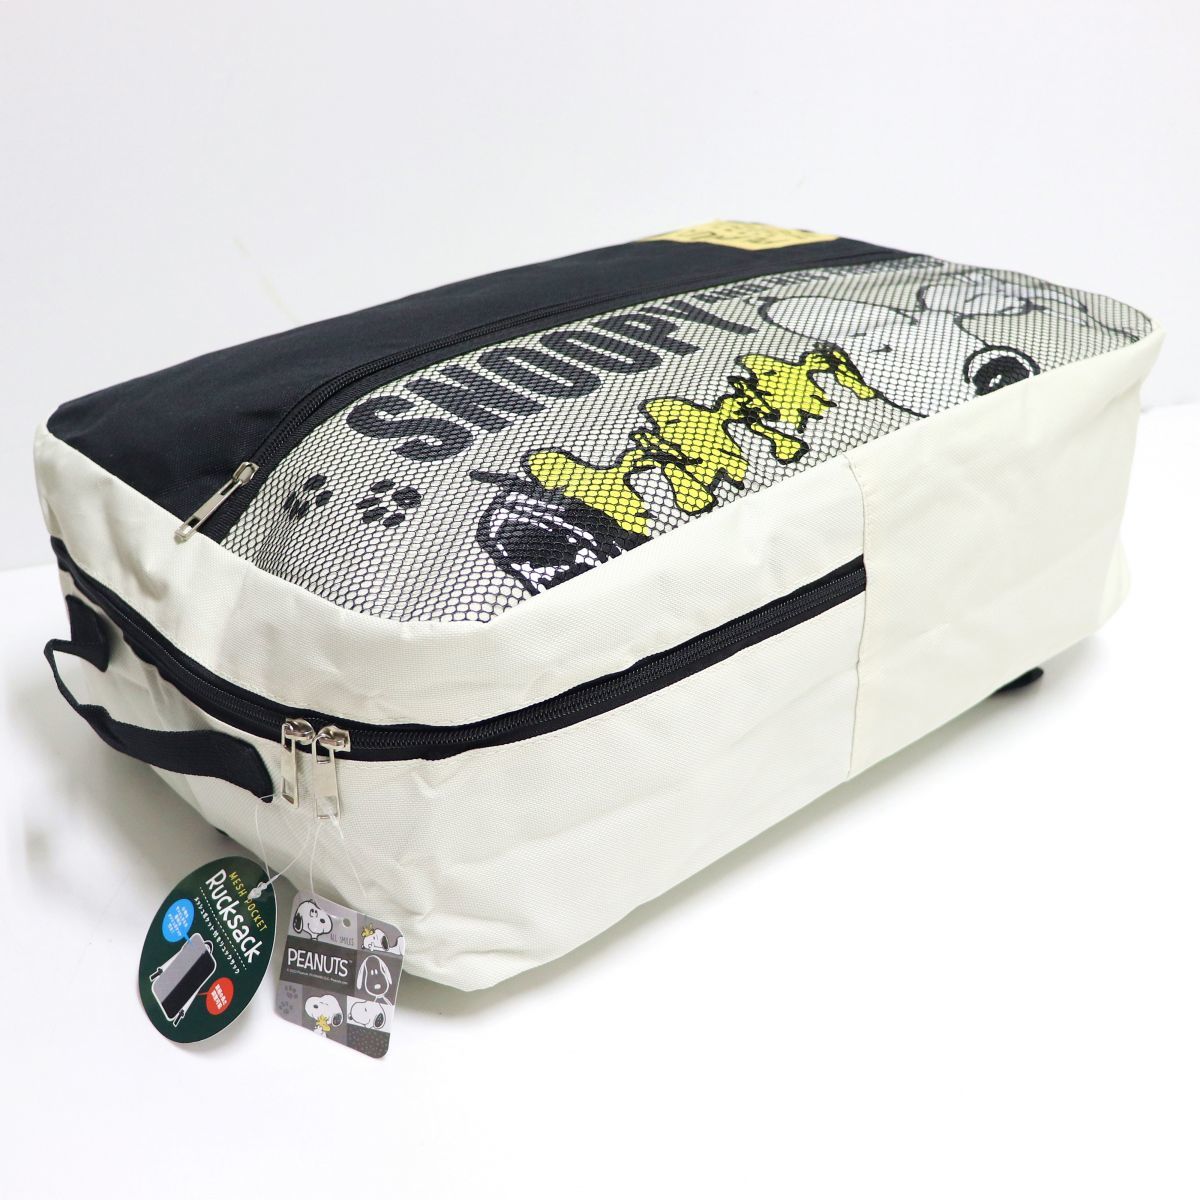 * Snoopy Peanuts SNOOPY PEANUTS new goods rucksack Day Pack backpack BAG bag bag [SNOOPYB-WHT1N] one six *QWER*